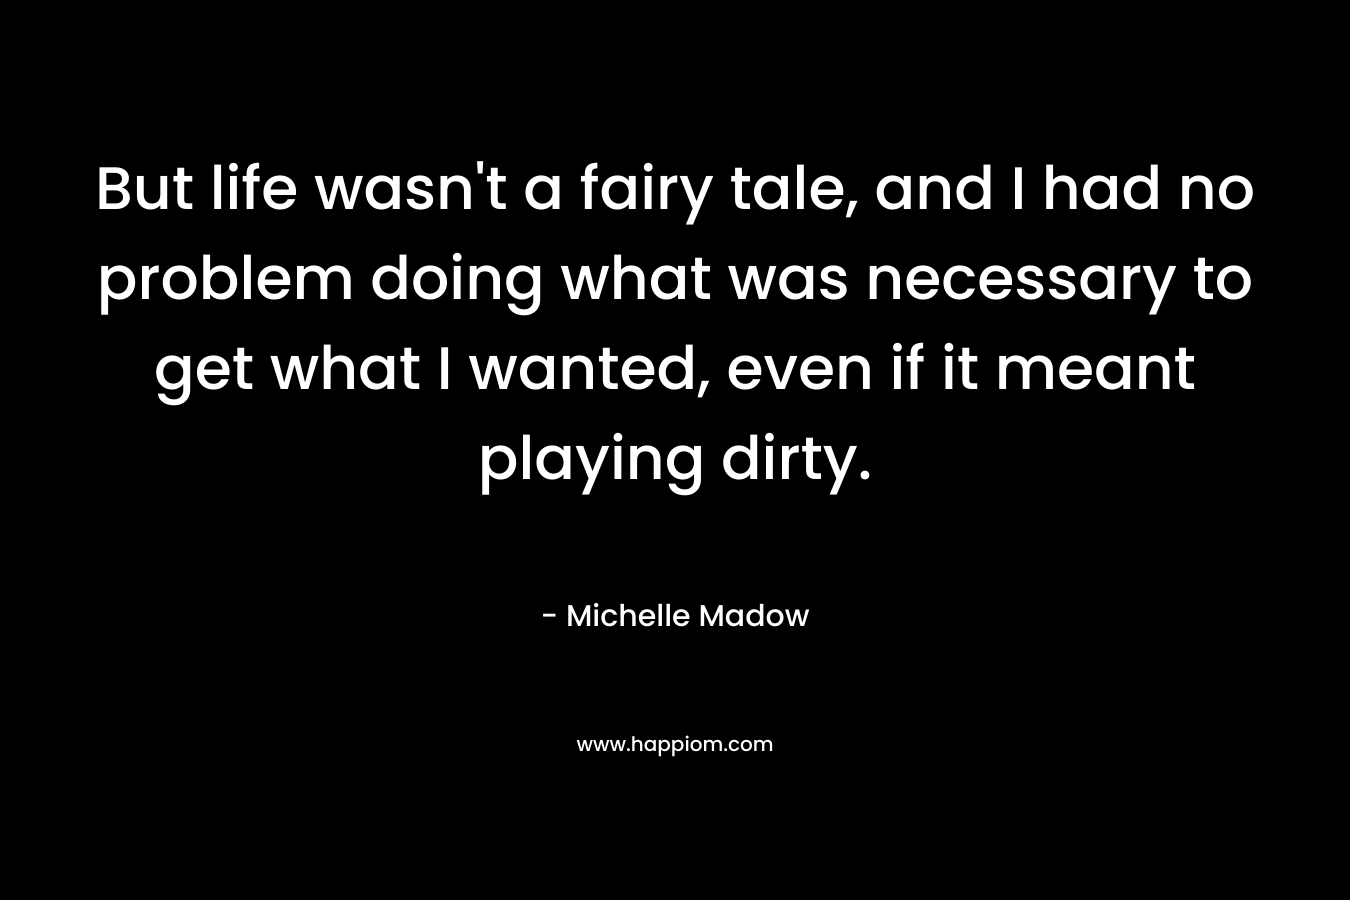 But life wasn't a fairy tale, and I had no problem doing what was necessary to get what I wanted, even if it meant playing dirty.